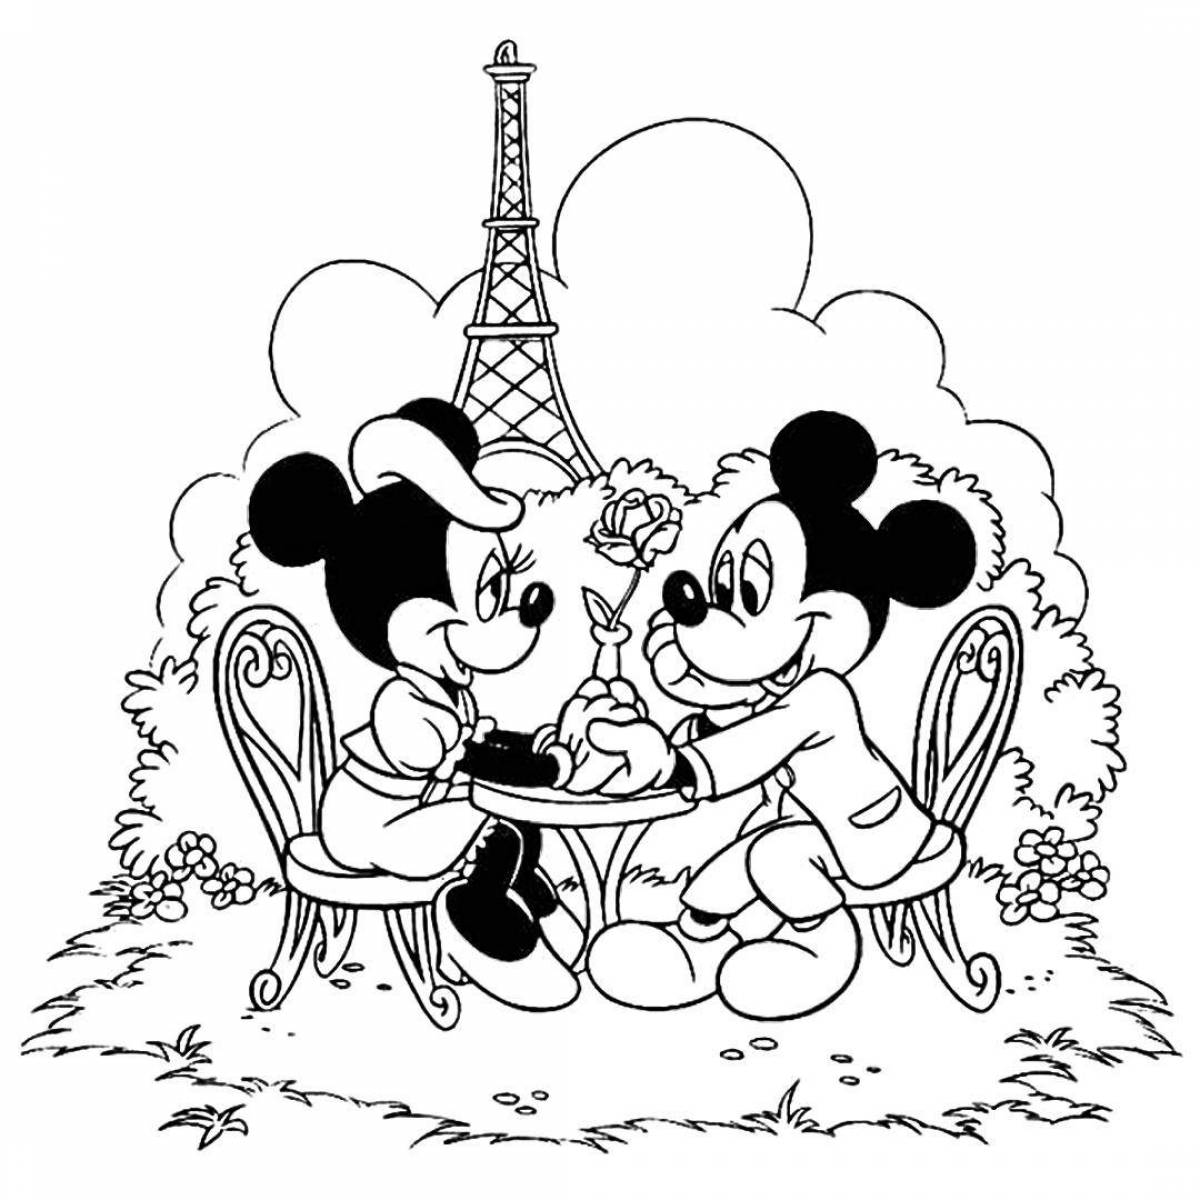 Amazing coloring pages for kids disney